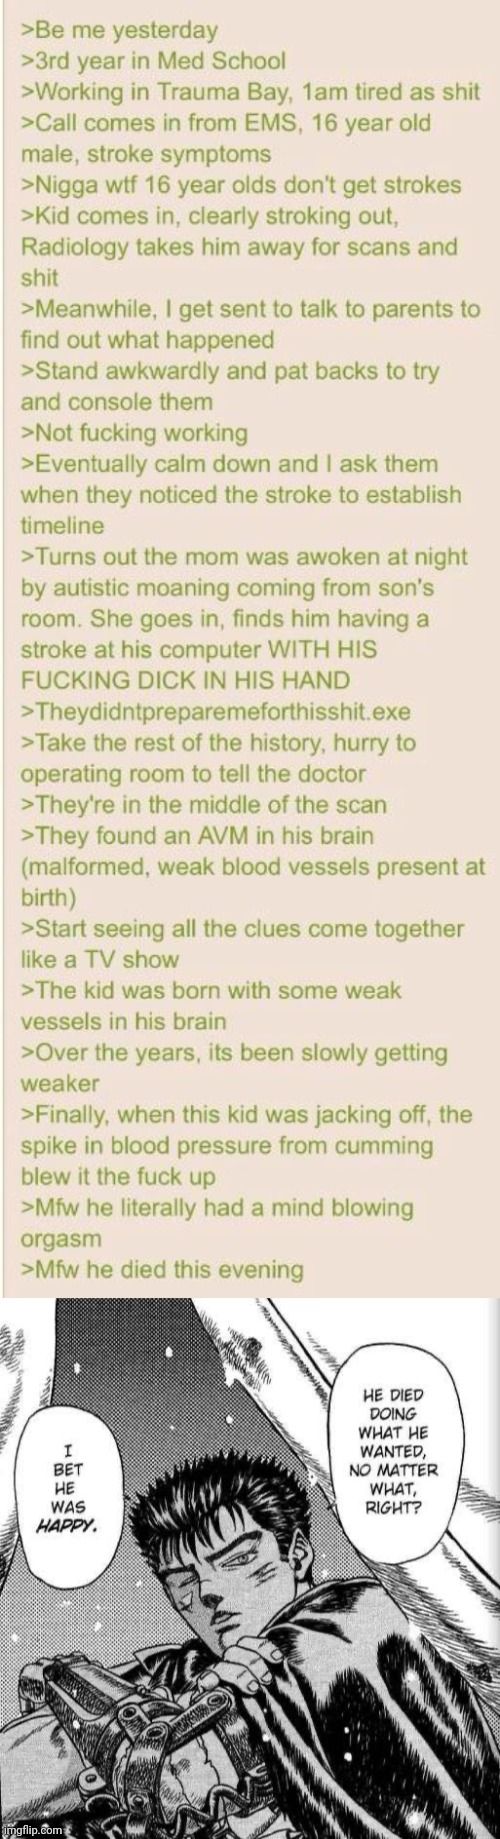 Anon deals with a stroker